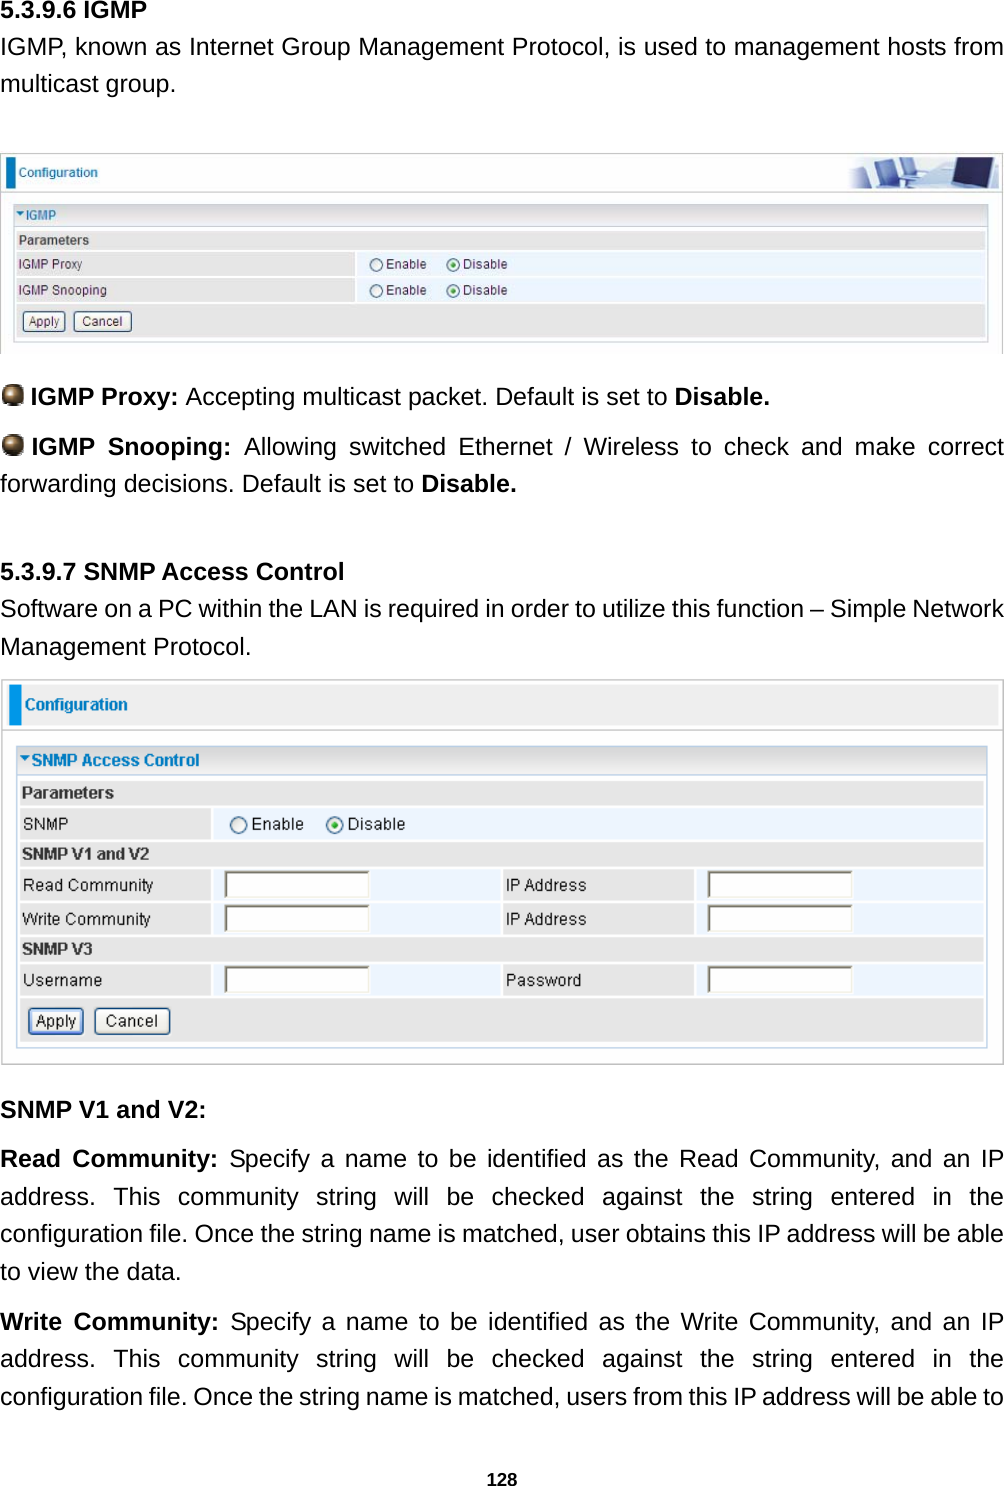 128 5.3.9.6 IGMP IGMP, known as Internet Group Management Protocol, is used to management hosts from multicast group.    IGMP Proxy: Accepting multicast packet. Default is set to Disable.   IGMP  Snooping:  Allowing switched Ethernet / Wireless to check and make correct forwarding decisions. Default is set to Disable.  5.3.9.7 SNMP Access Control Software on a PC within the LAN is required in order to utilize this function – Simple Network Management Protocol.  SNMP V1 and V2: Read Community: Specify a name to be identified as the Read Community, and an IP address. This community string will be checked against the string entered in the configuration file. Once the string name is matched, user obtains this IP address will be able to view the data. Write Community: Specify a name to be identified as the Write Community, and an IP address. This community string will be checked against the string entered in the configuration file. Once the string name is matched, users from this IP address will be able to 